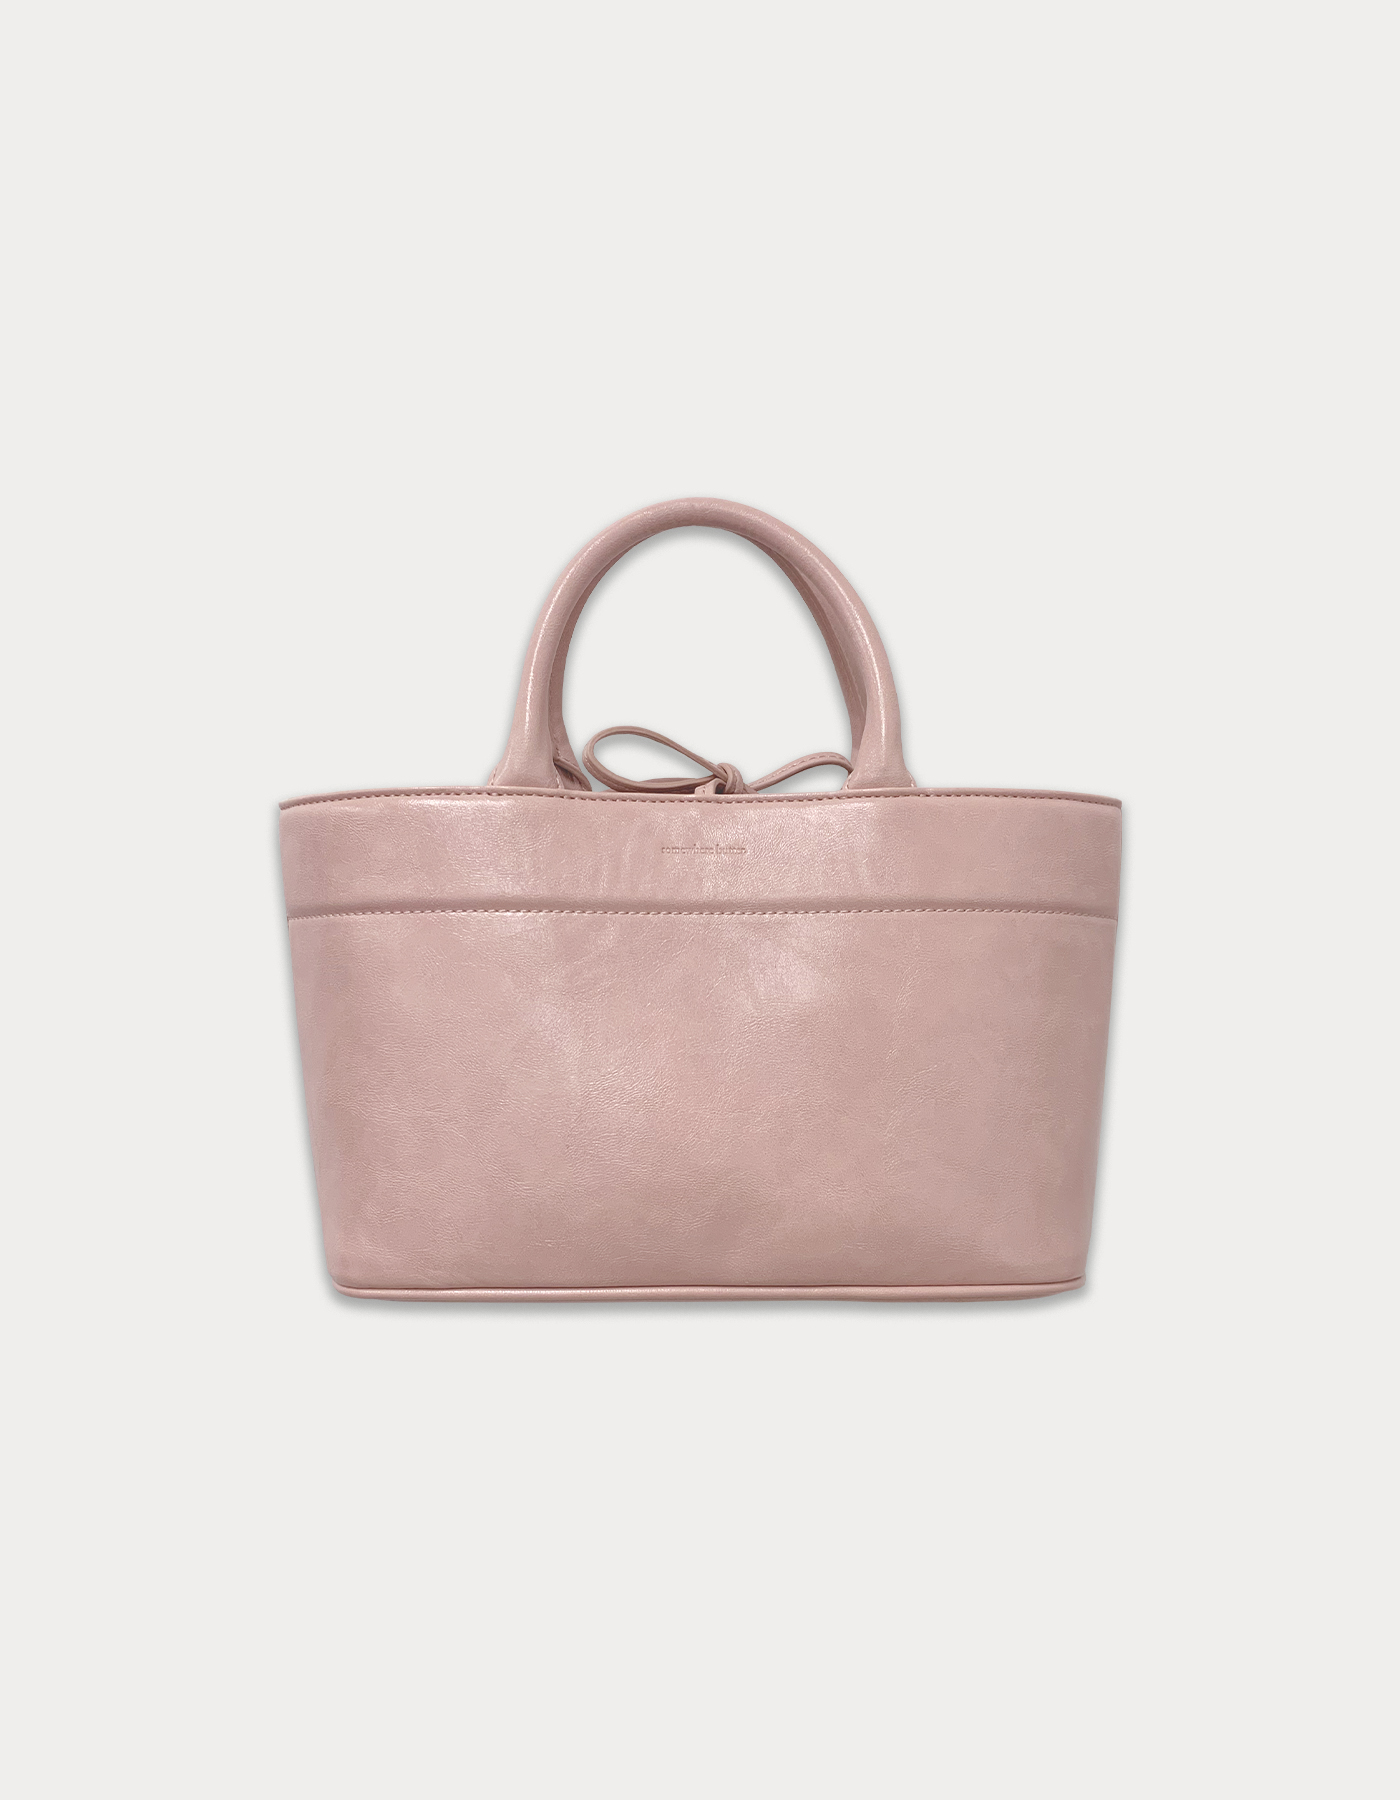 [2nd Order 5.3 출고] Dear tote bag - baby pink